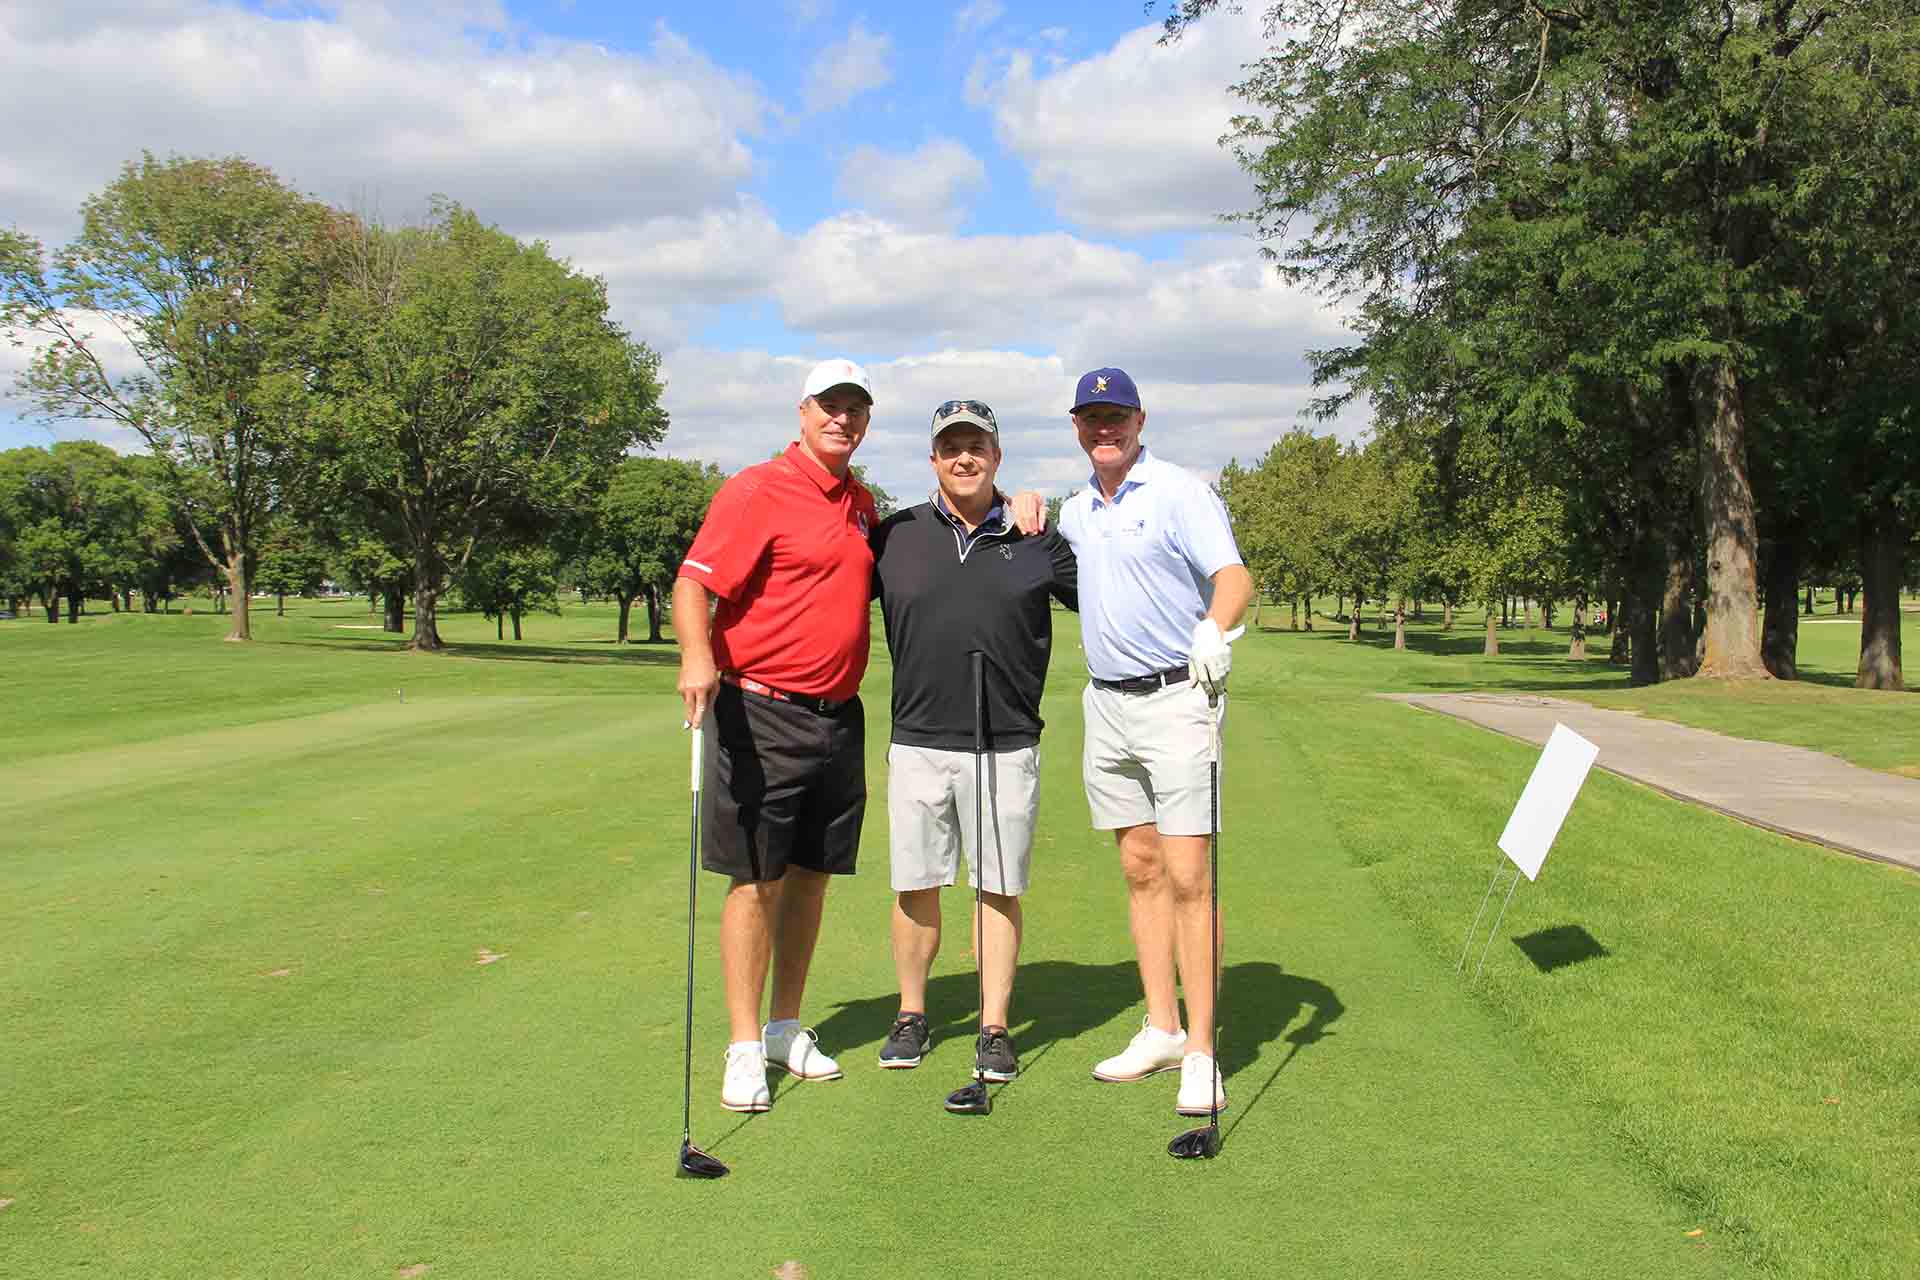 2022-Endowment-Golf-Classic-three-people-pose-on-golf-course